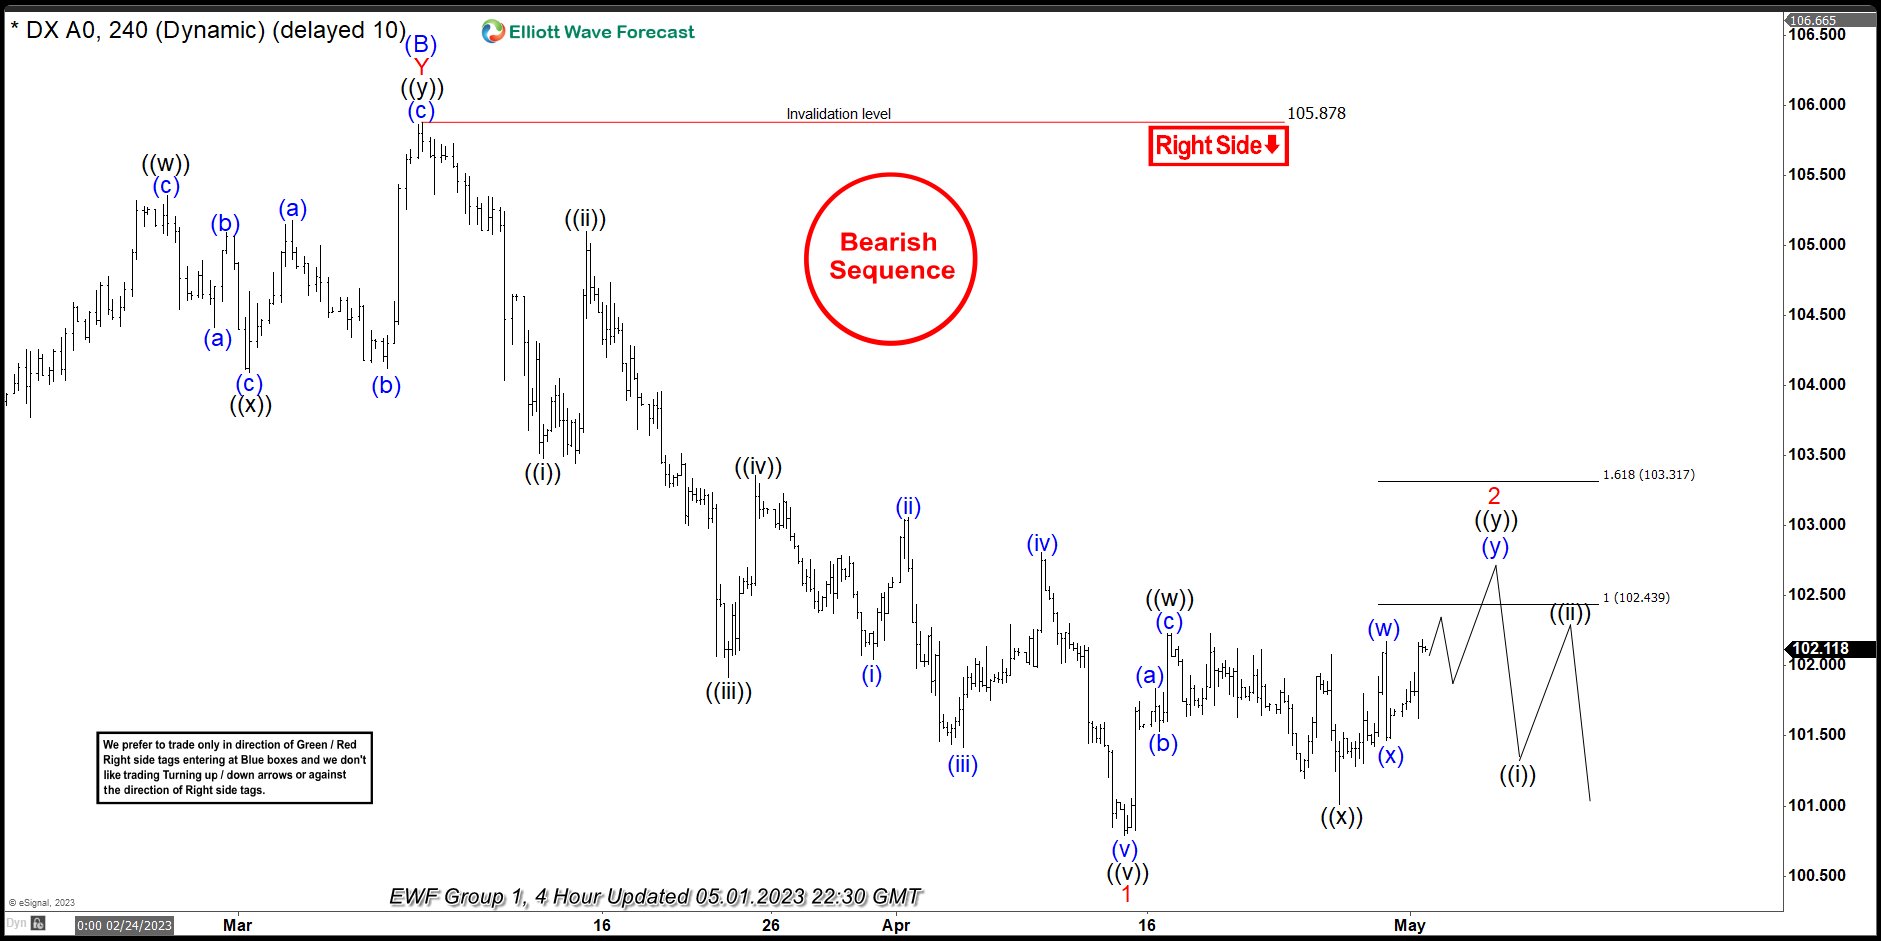 USDX Forecasting The Decline After Elliott Wave Double Three